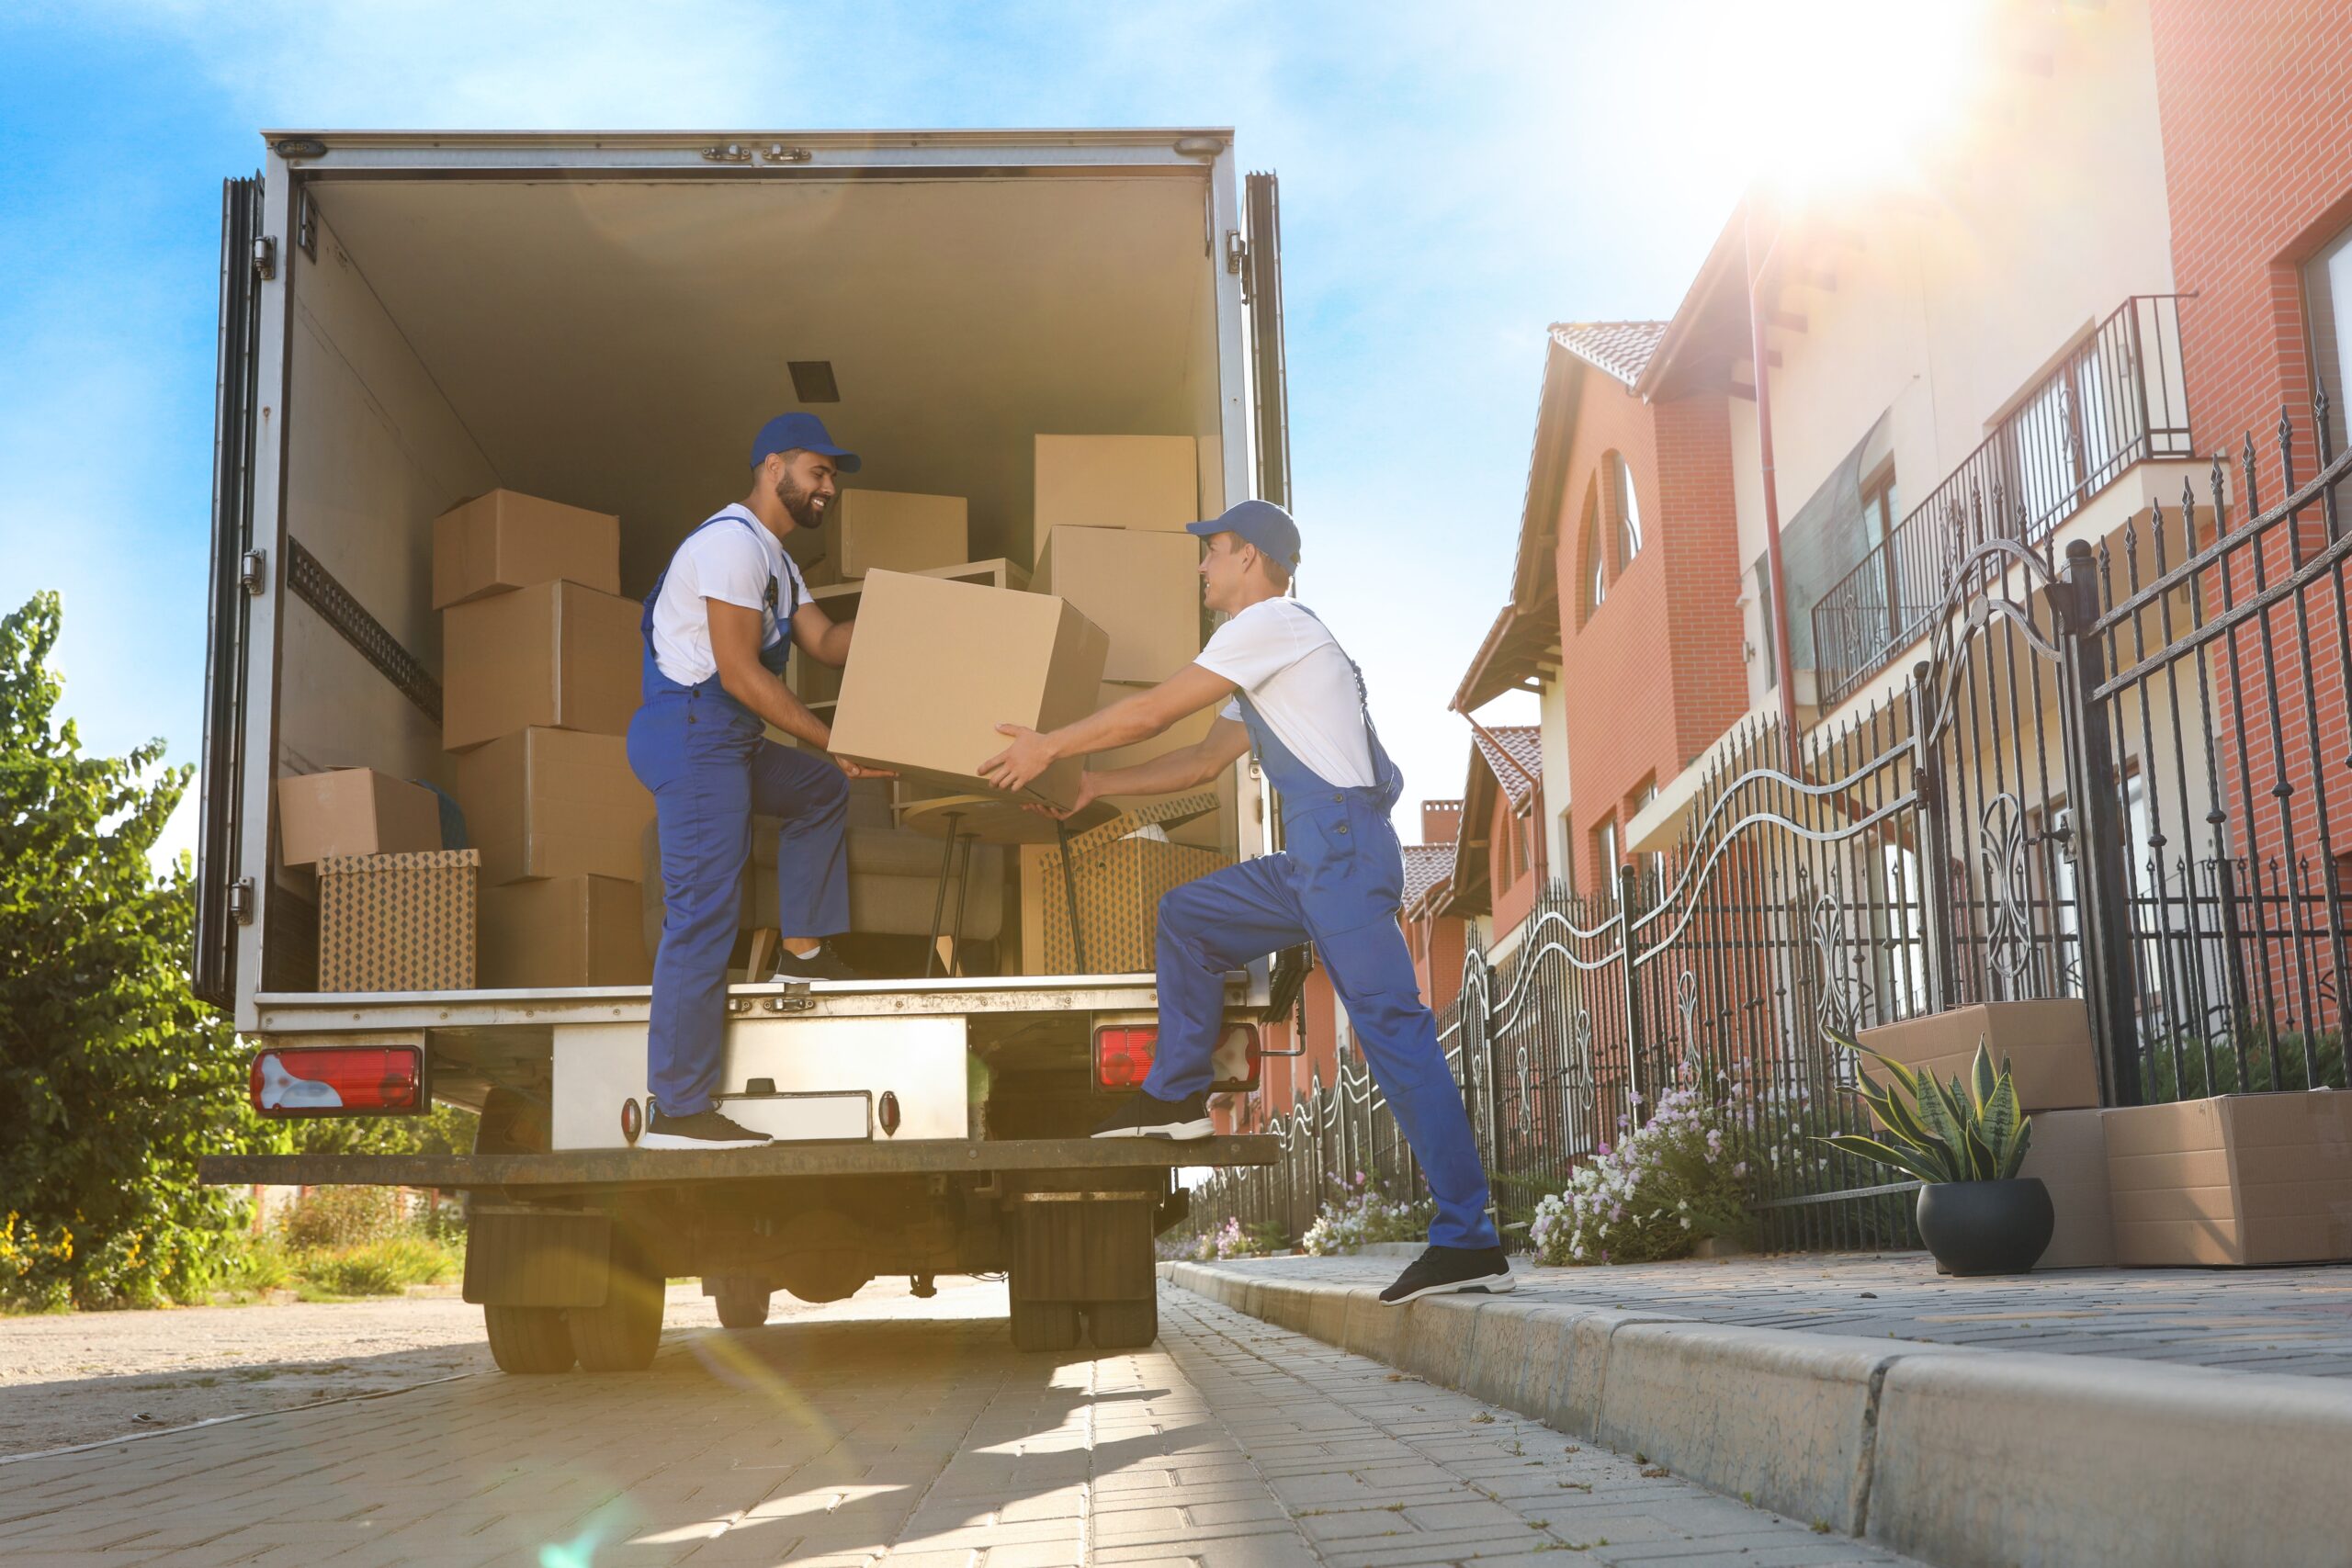 NRI provides quality corporate movers for domestic or international household goods relocation